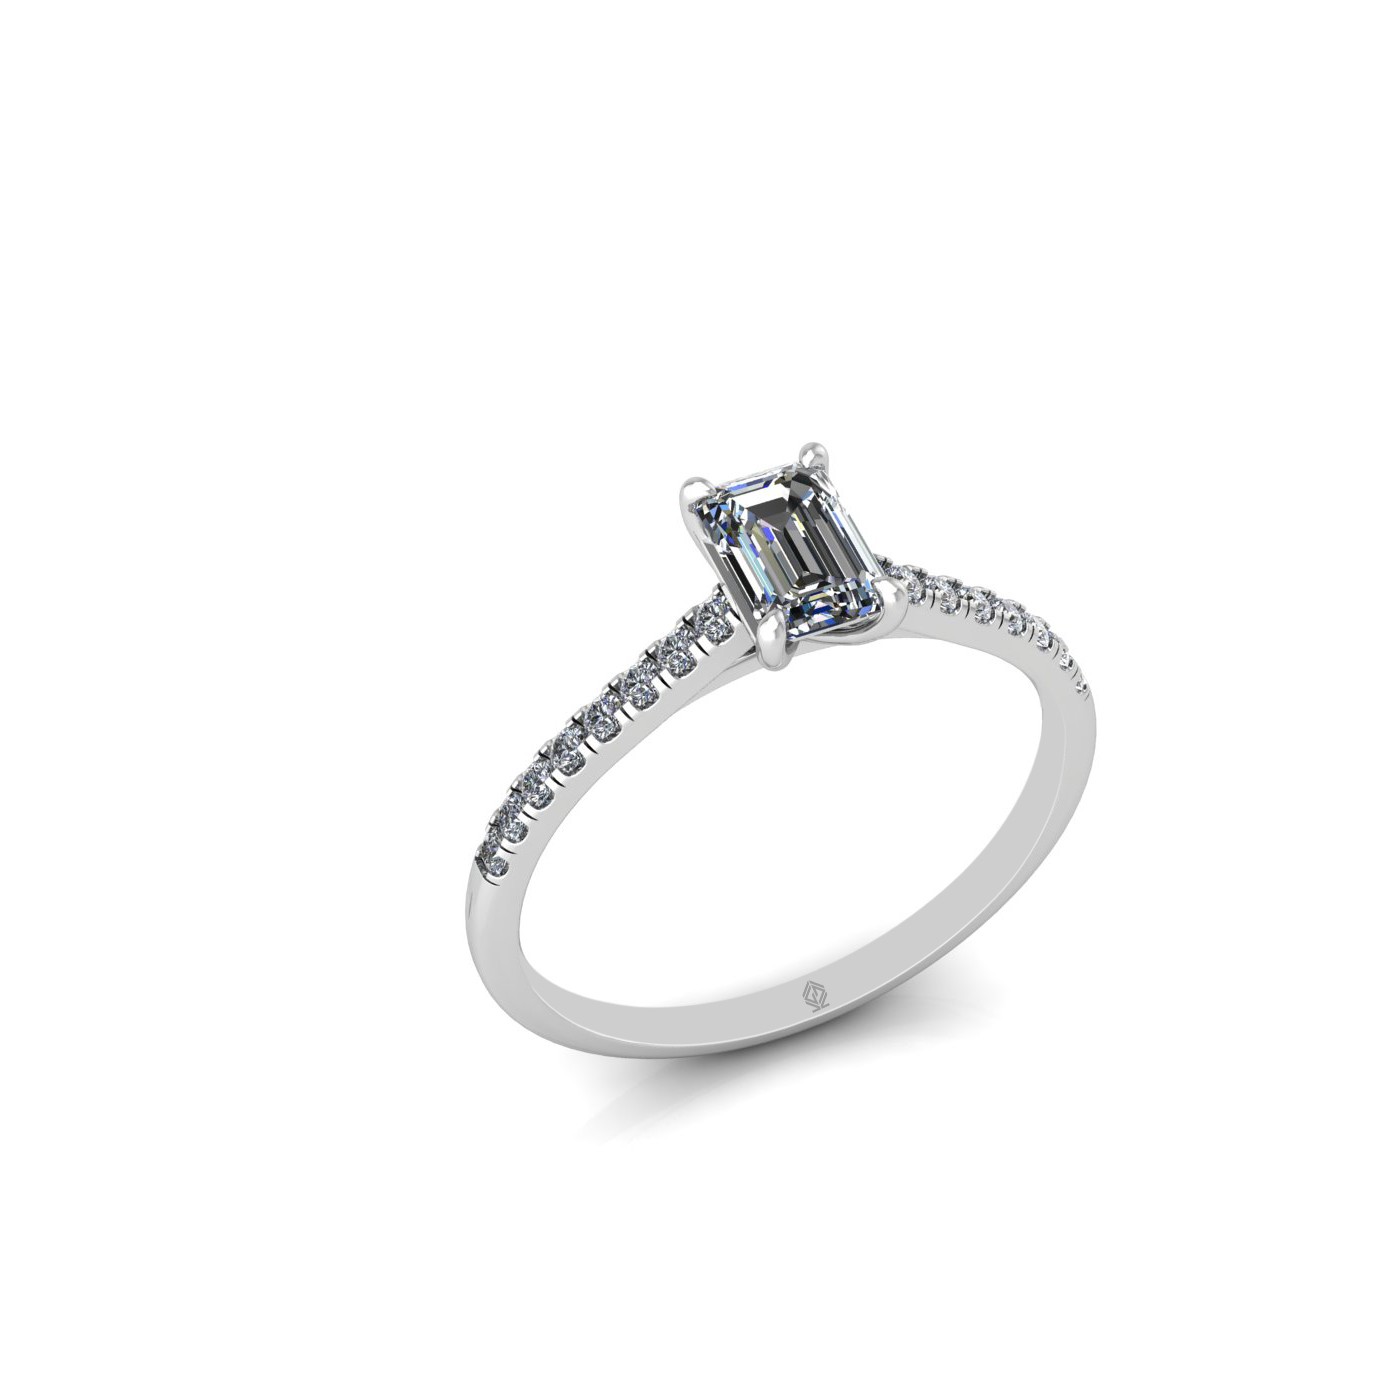 18k white gold  0,50 ct 4 prongs emerald cut diamond engagement ring with whisper thin pavÉ set band